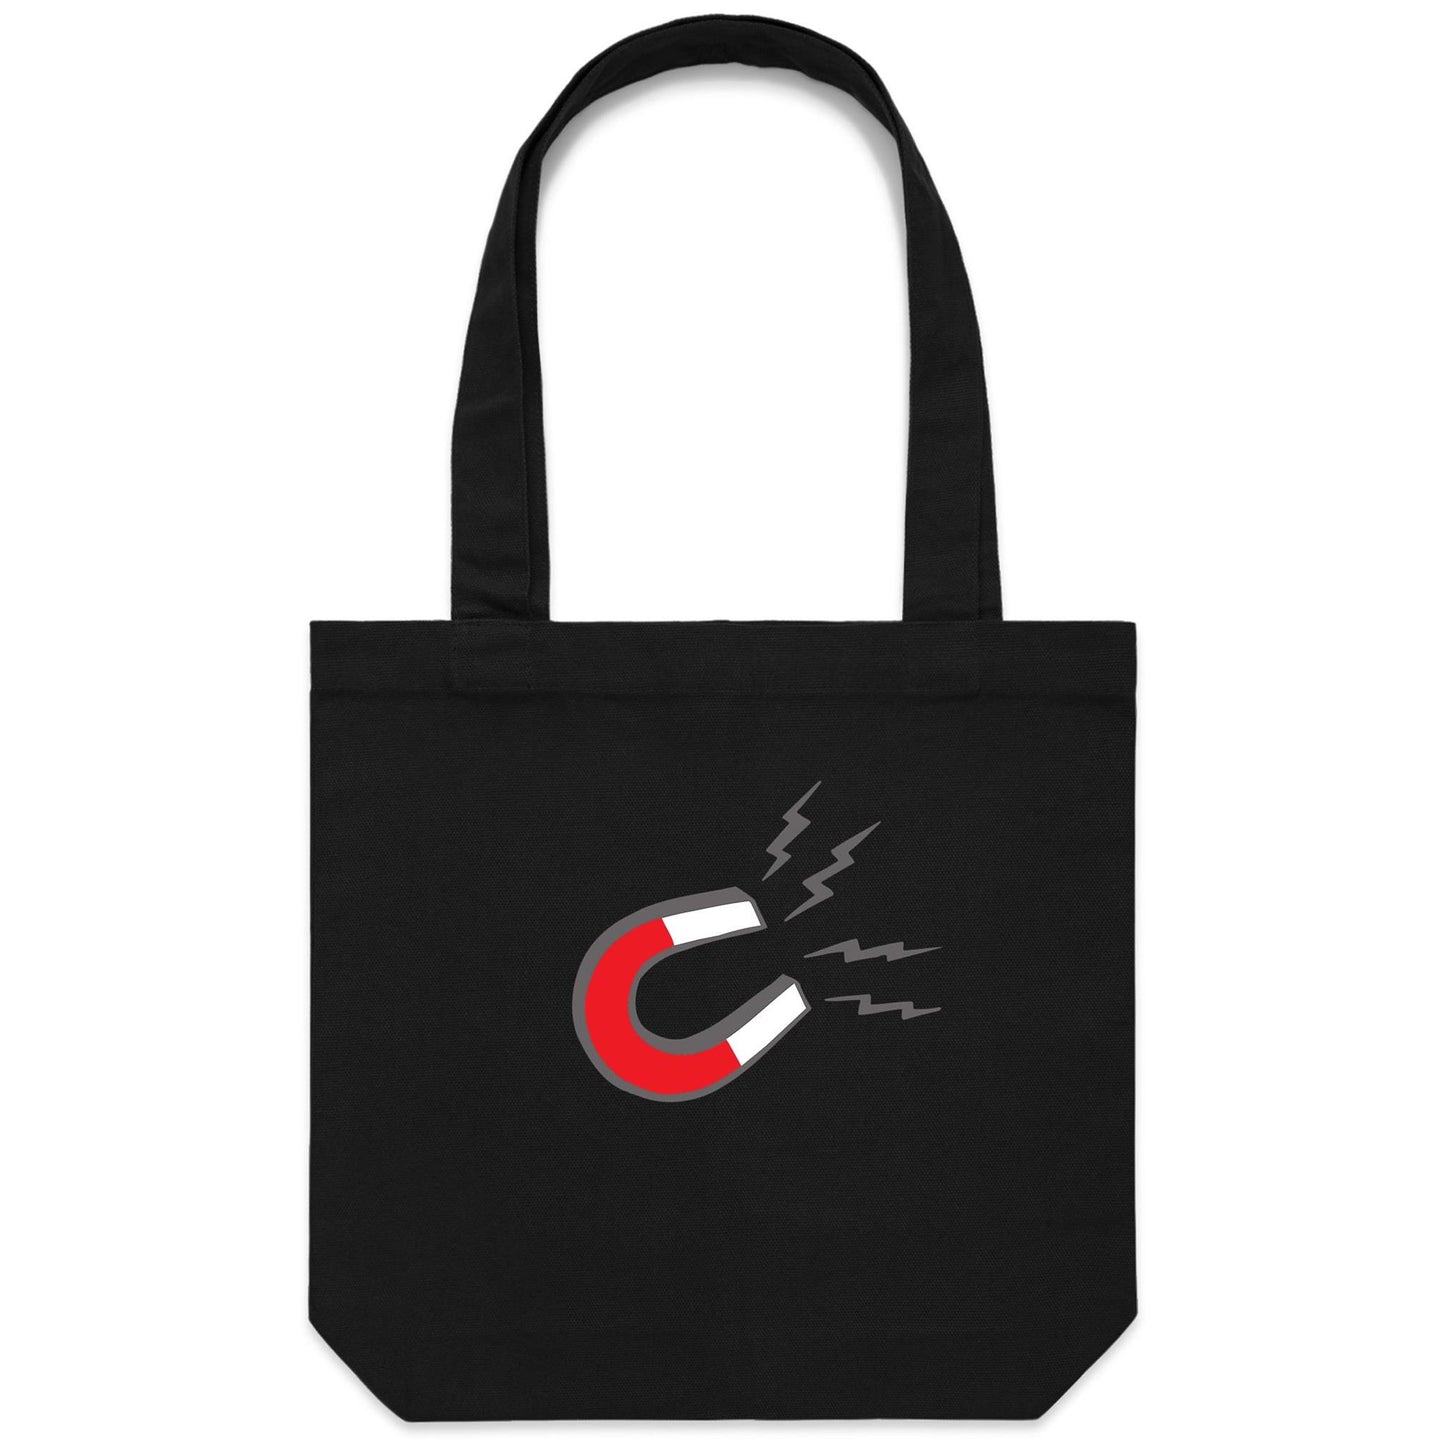 Magnet Canvas Totes